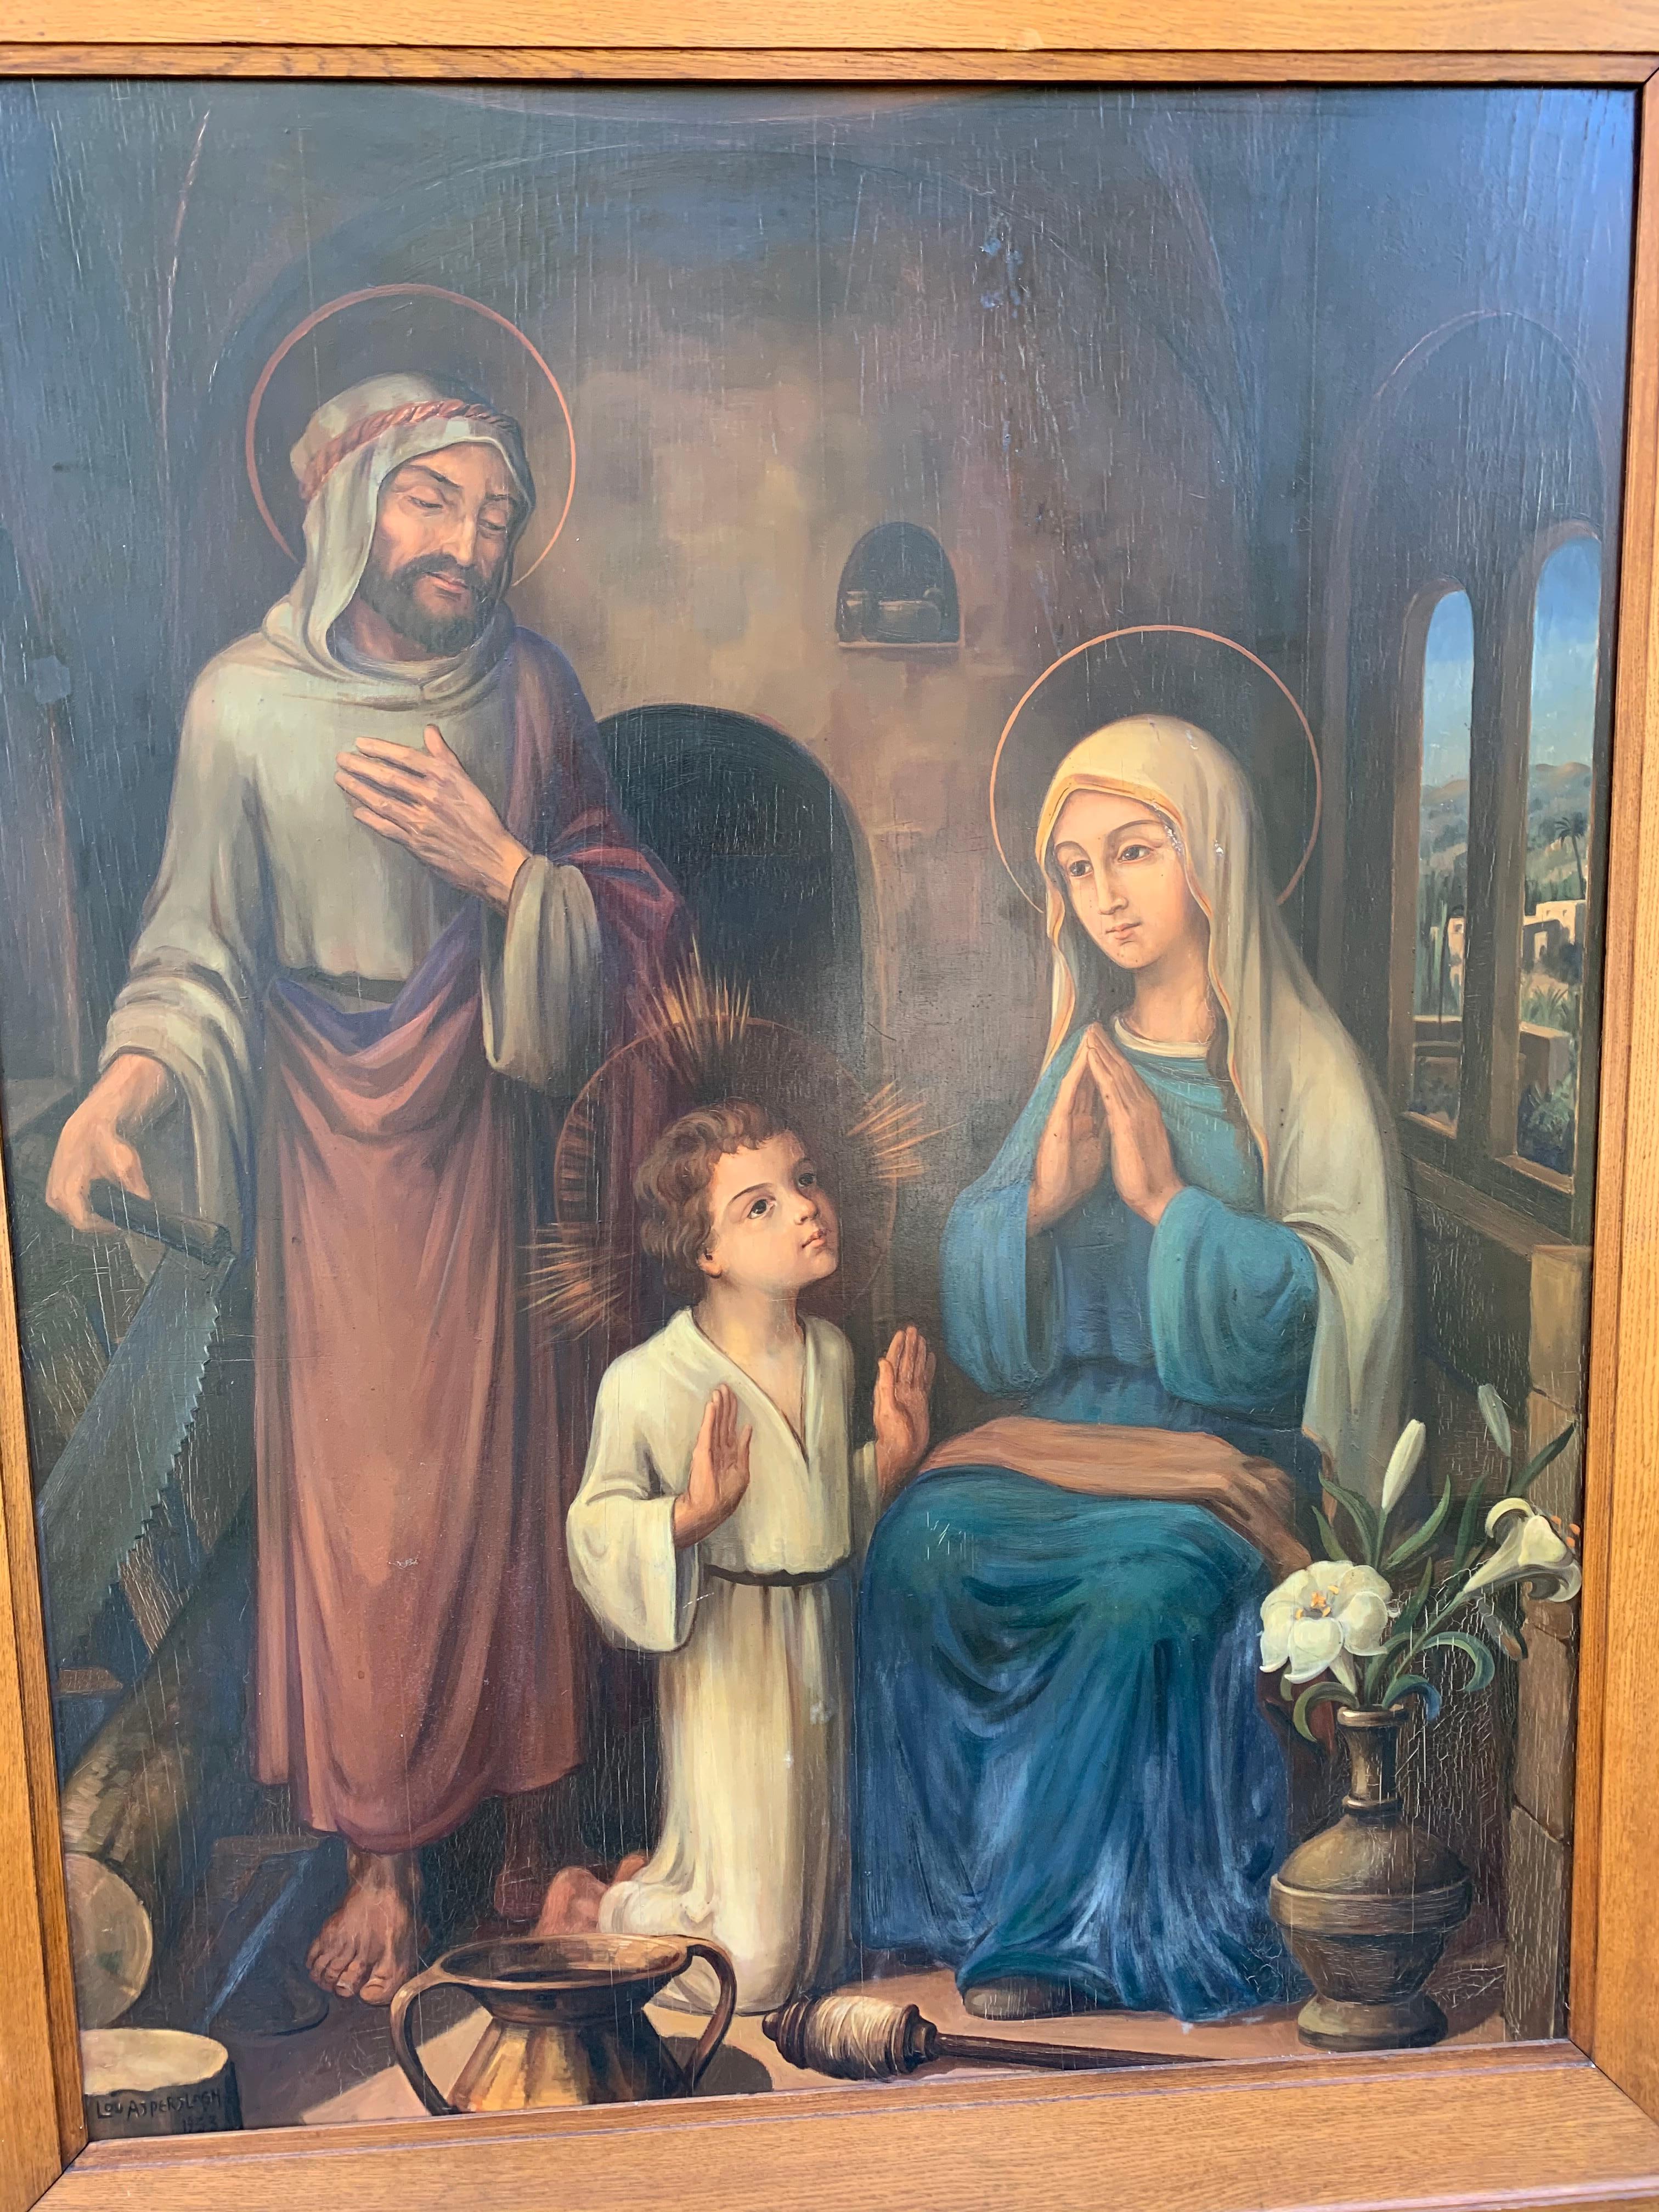 Great monastery attic find.

Sometimes when there are not enough monks left to keep a monastery open, they close up forever and the works of religious art get sold. Via one of our contacts we were introduced to the person who purchased this giant